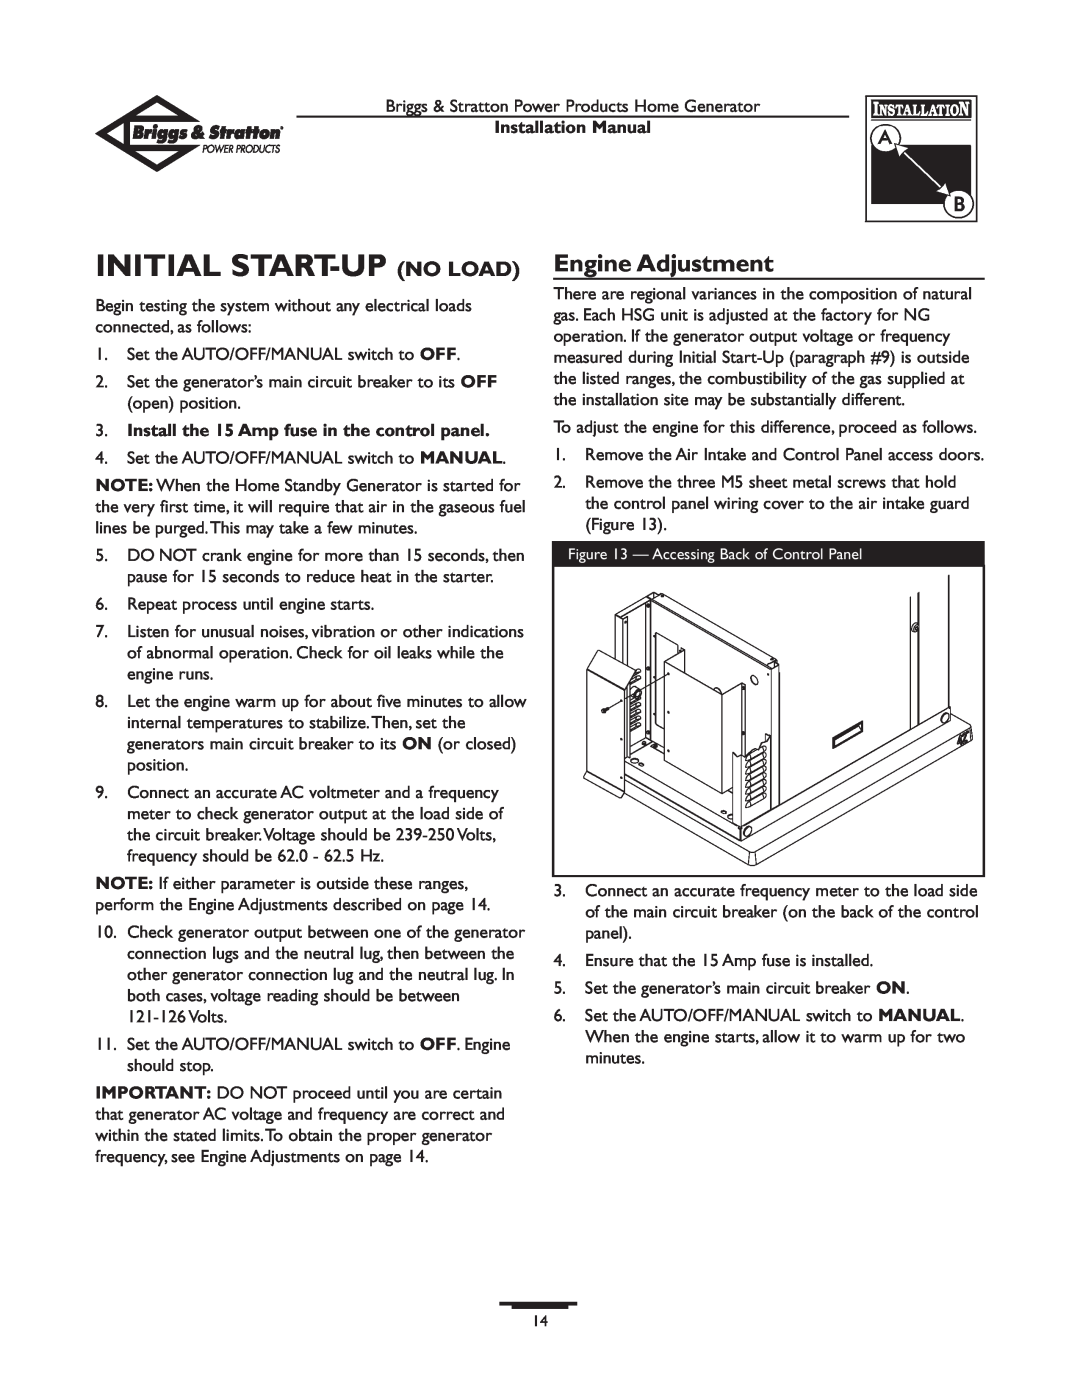 Briggs & Stratton 01938-0 manual Initial Start-Up No Load, Engine Adjustment, Install the 15 Amp fuse in the control panel 